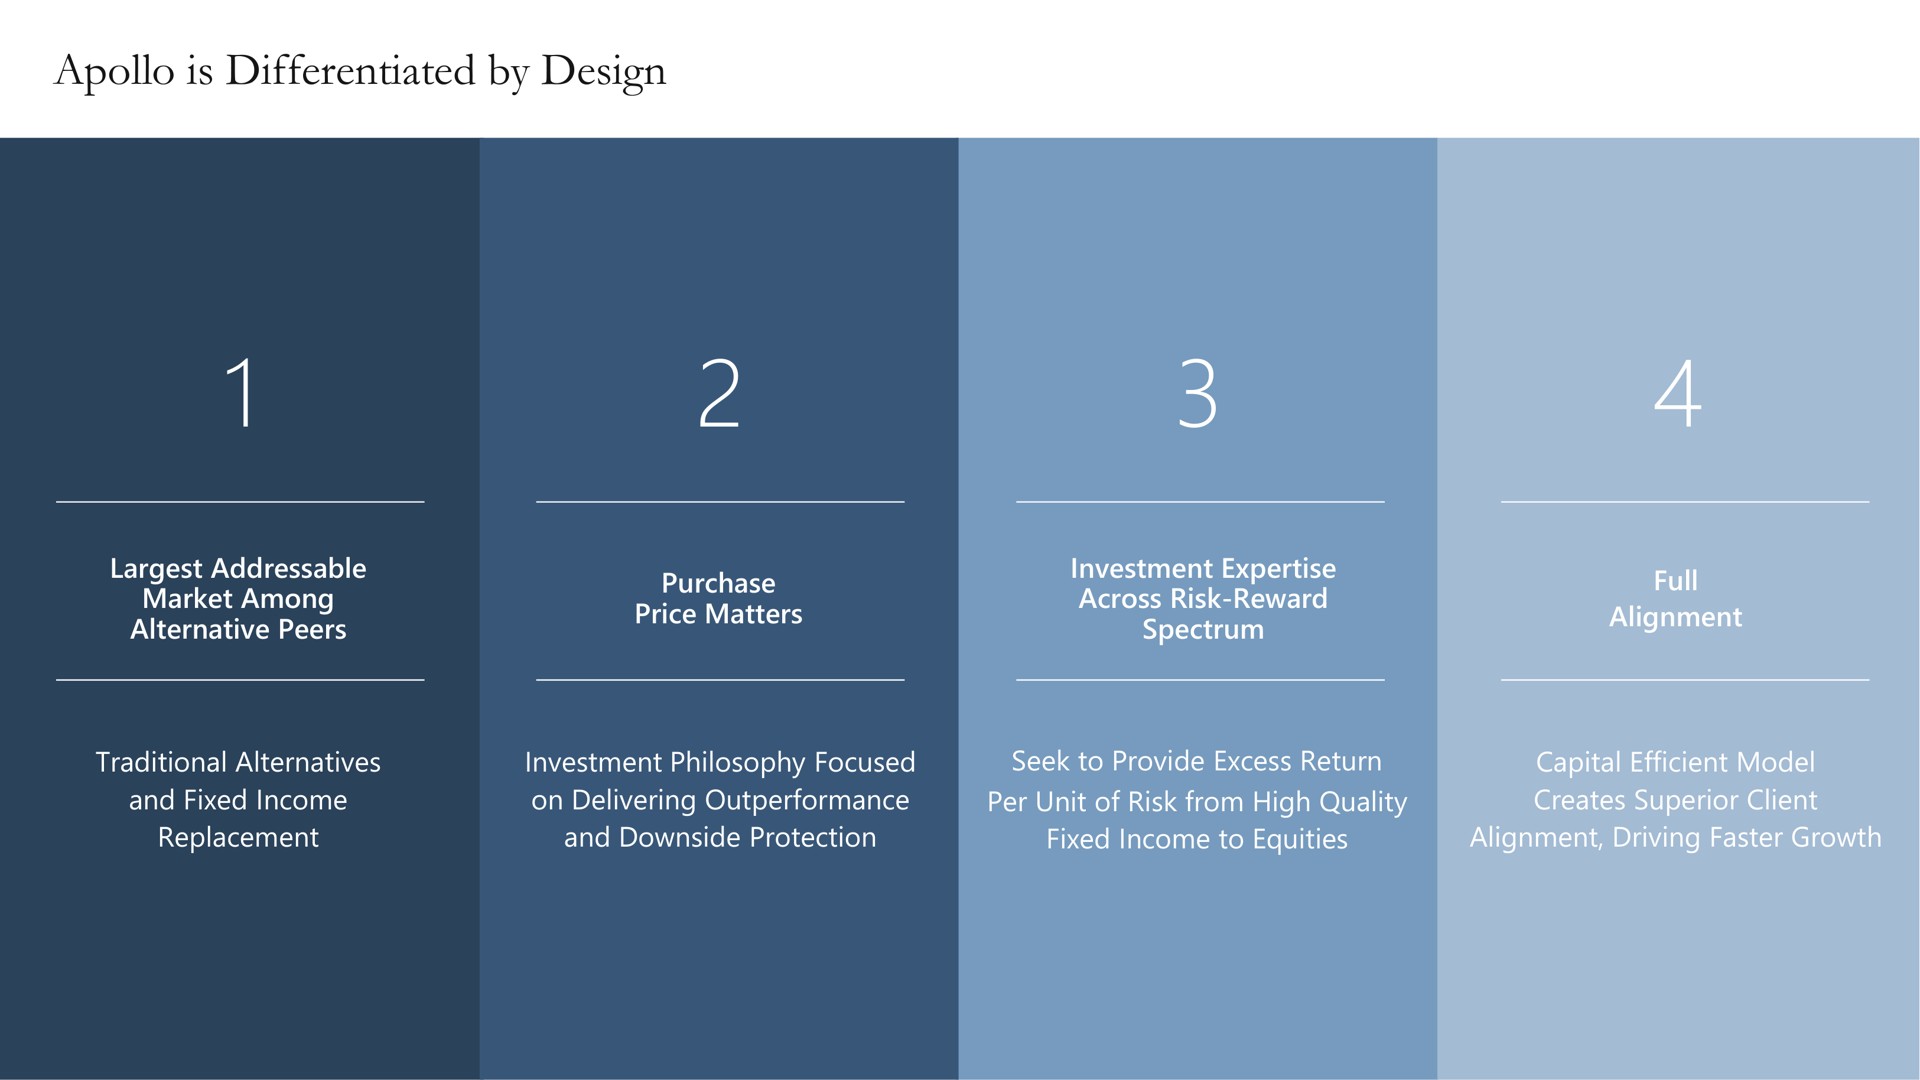 is differentiated by design | Apollo Global Management